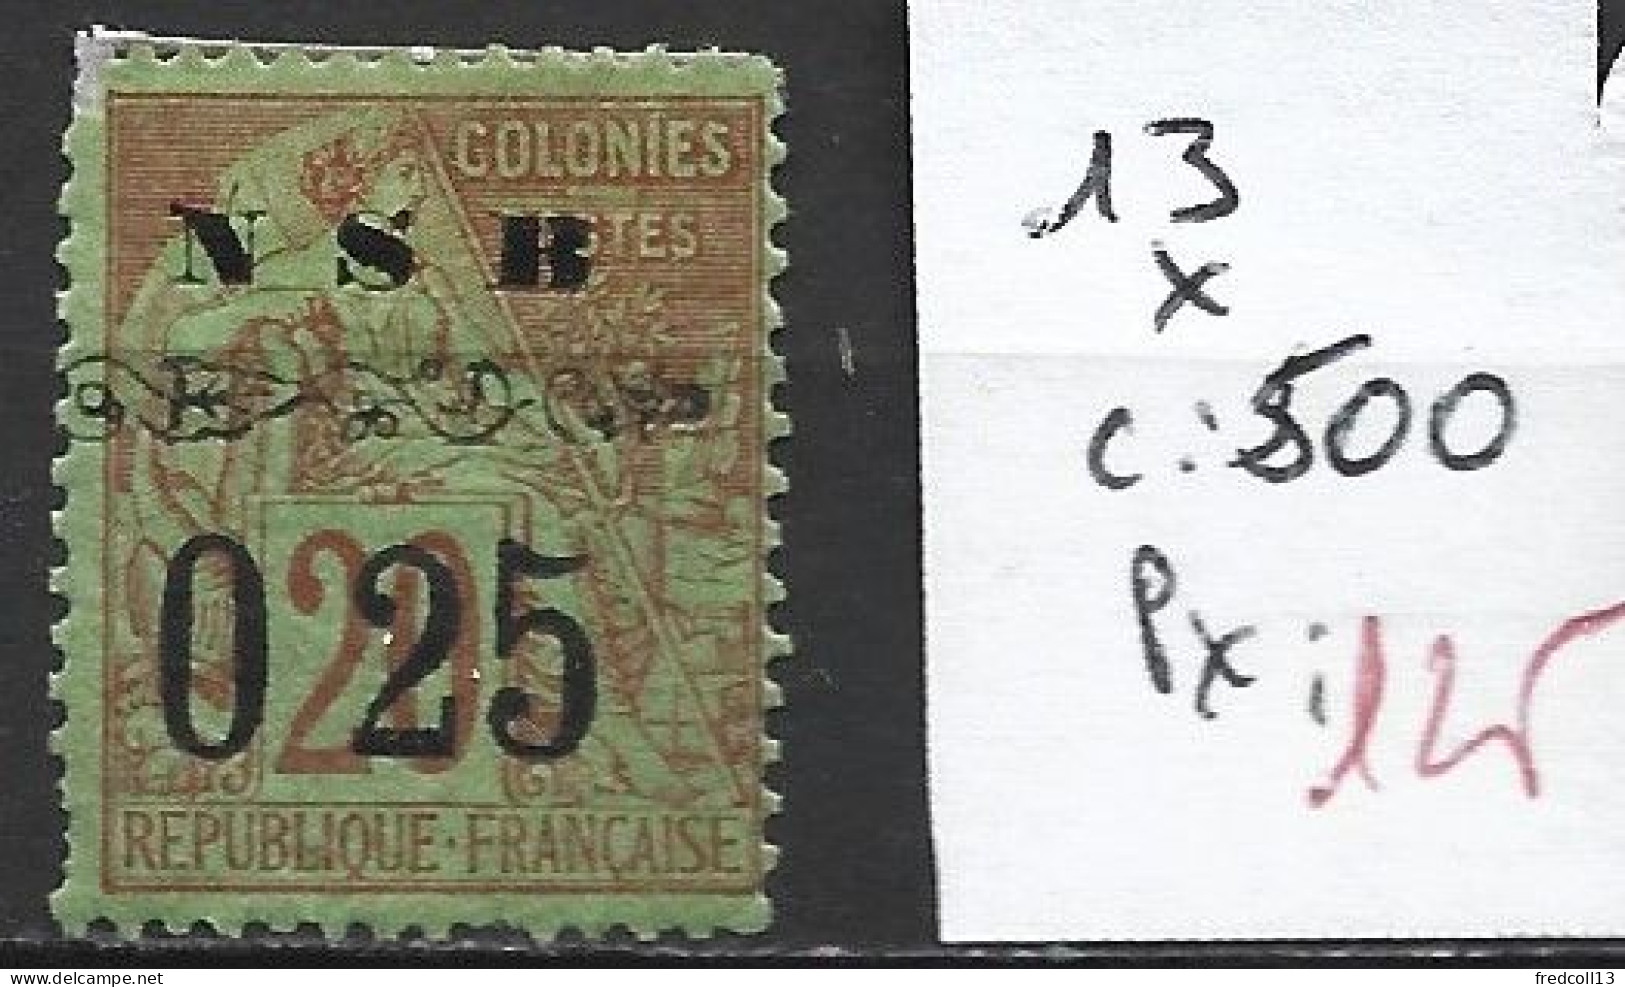 NOSSI-BE TAXE 13 * Côte 500 € - Unused Stamps